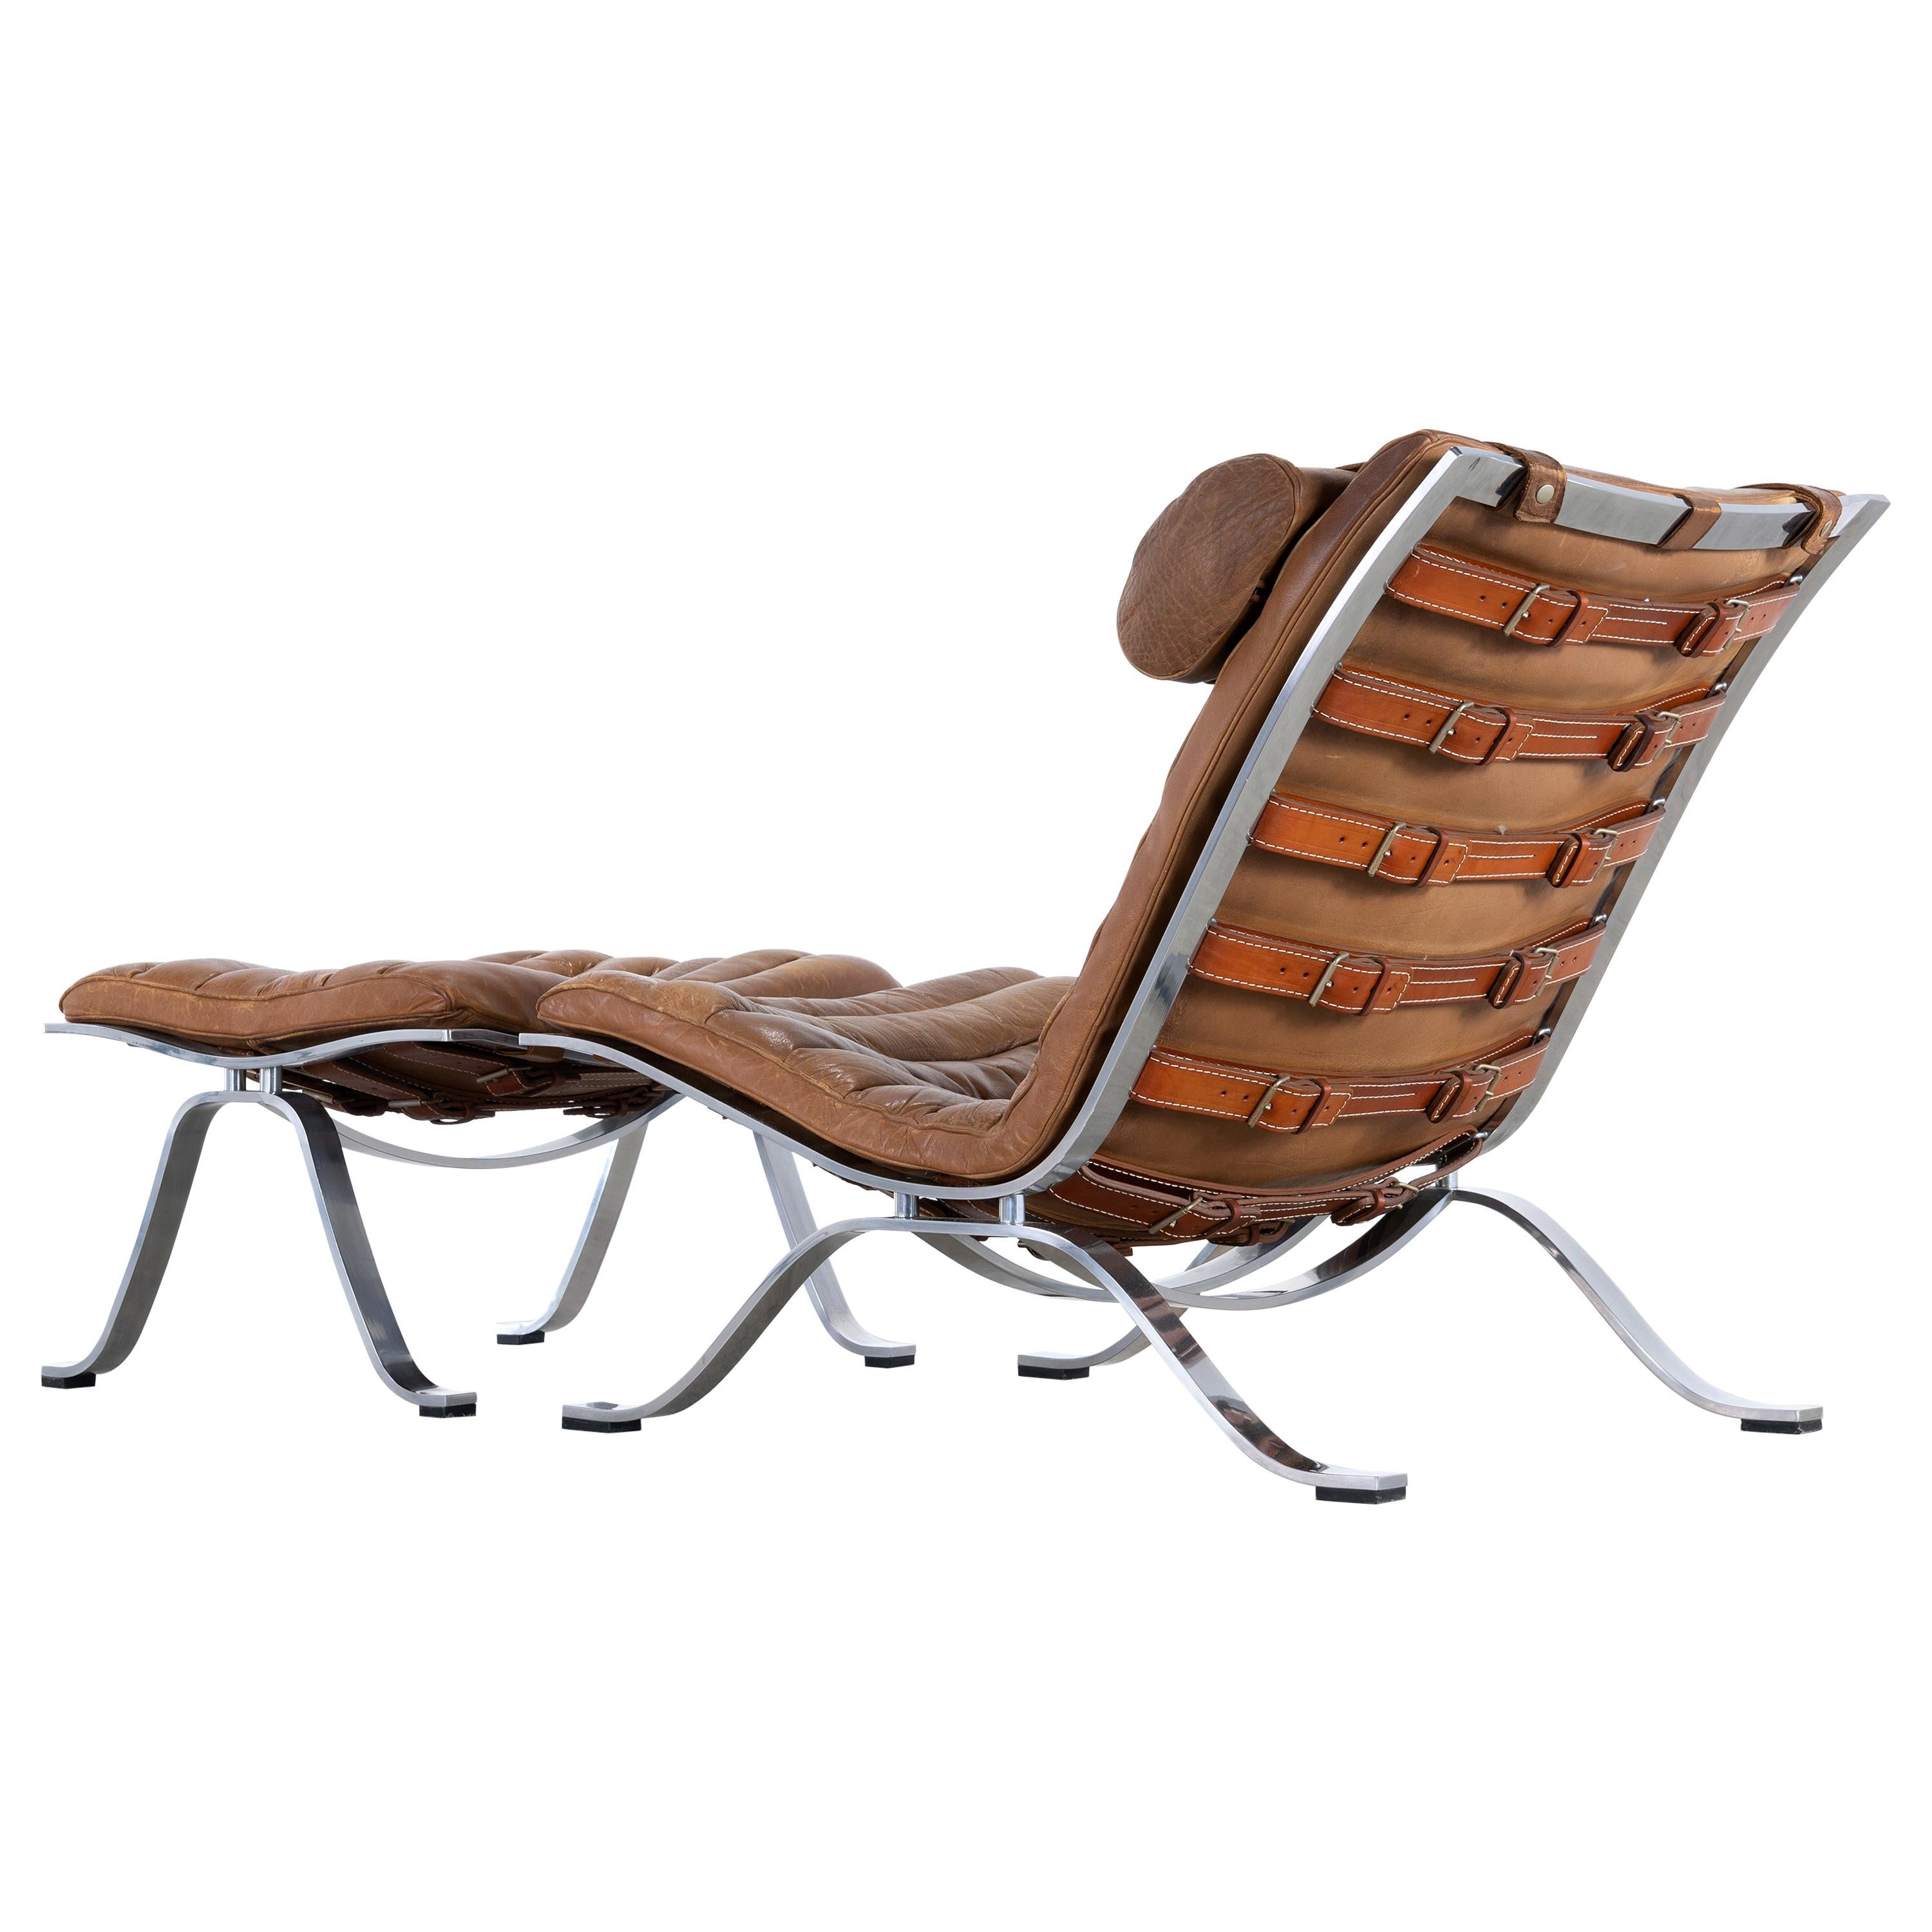 Arne Norell, Ari Lounge Chair and Ottoman, 1966 or Norell Möbel, Aneby, Sweden